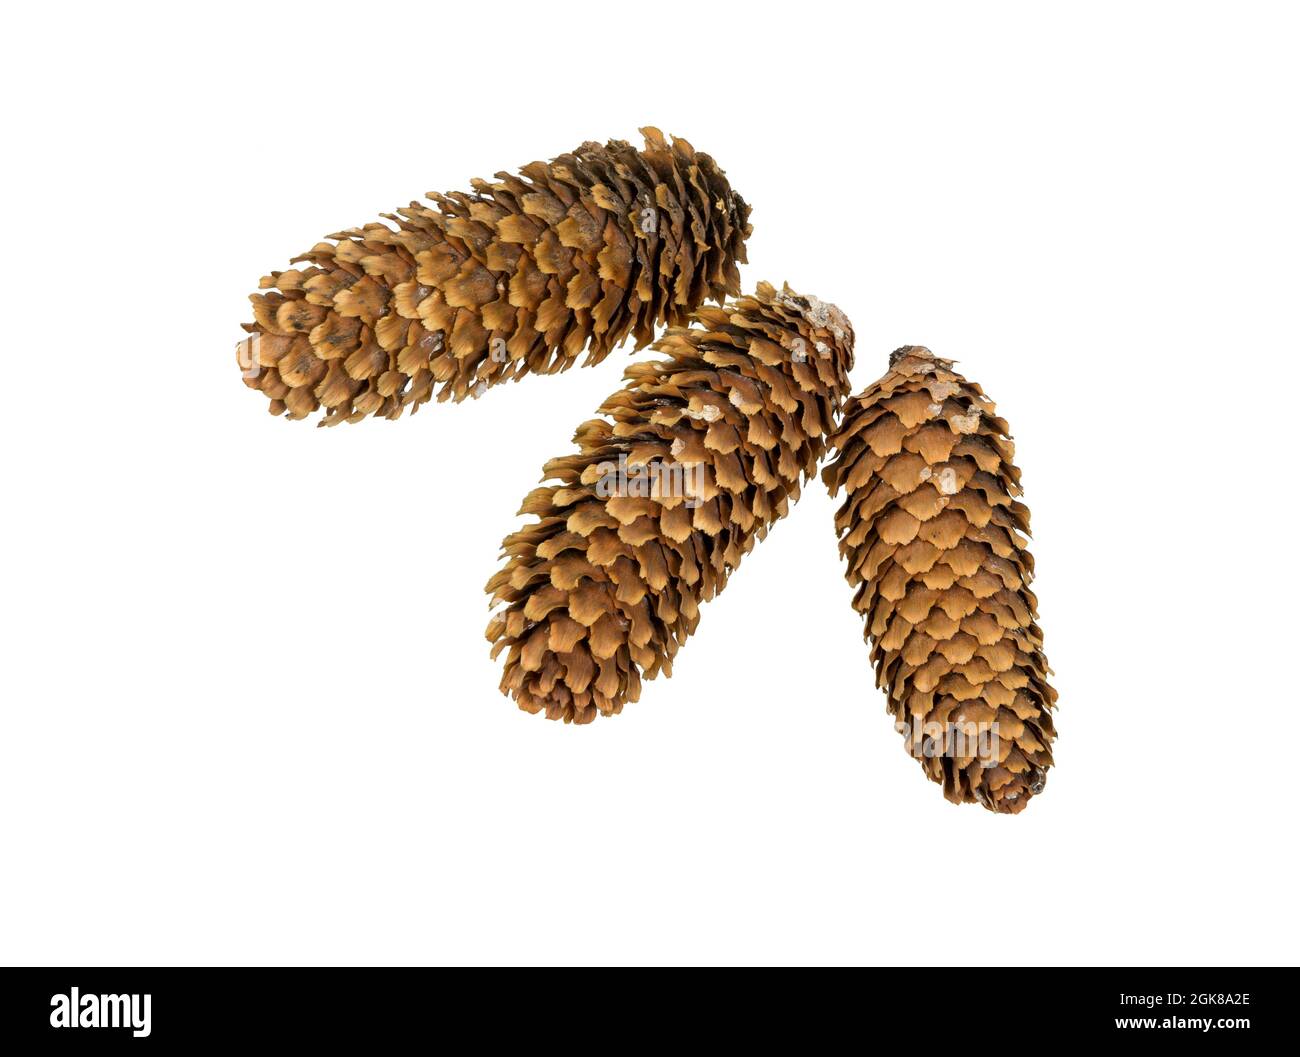 Cone fir. Spruce cones isolated on white background. Cones of a Christmas tree. Stock Photo